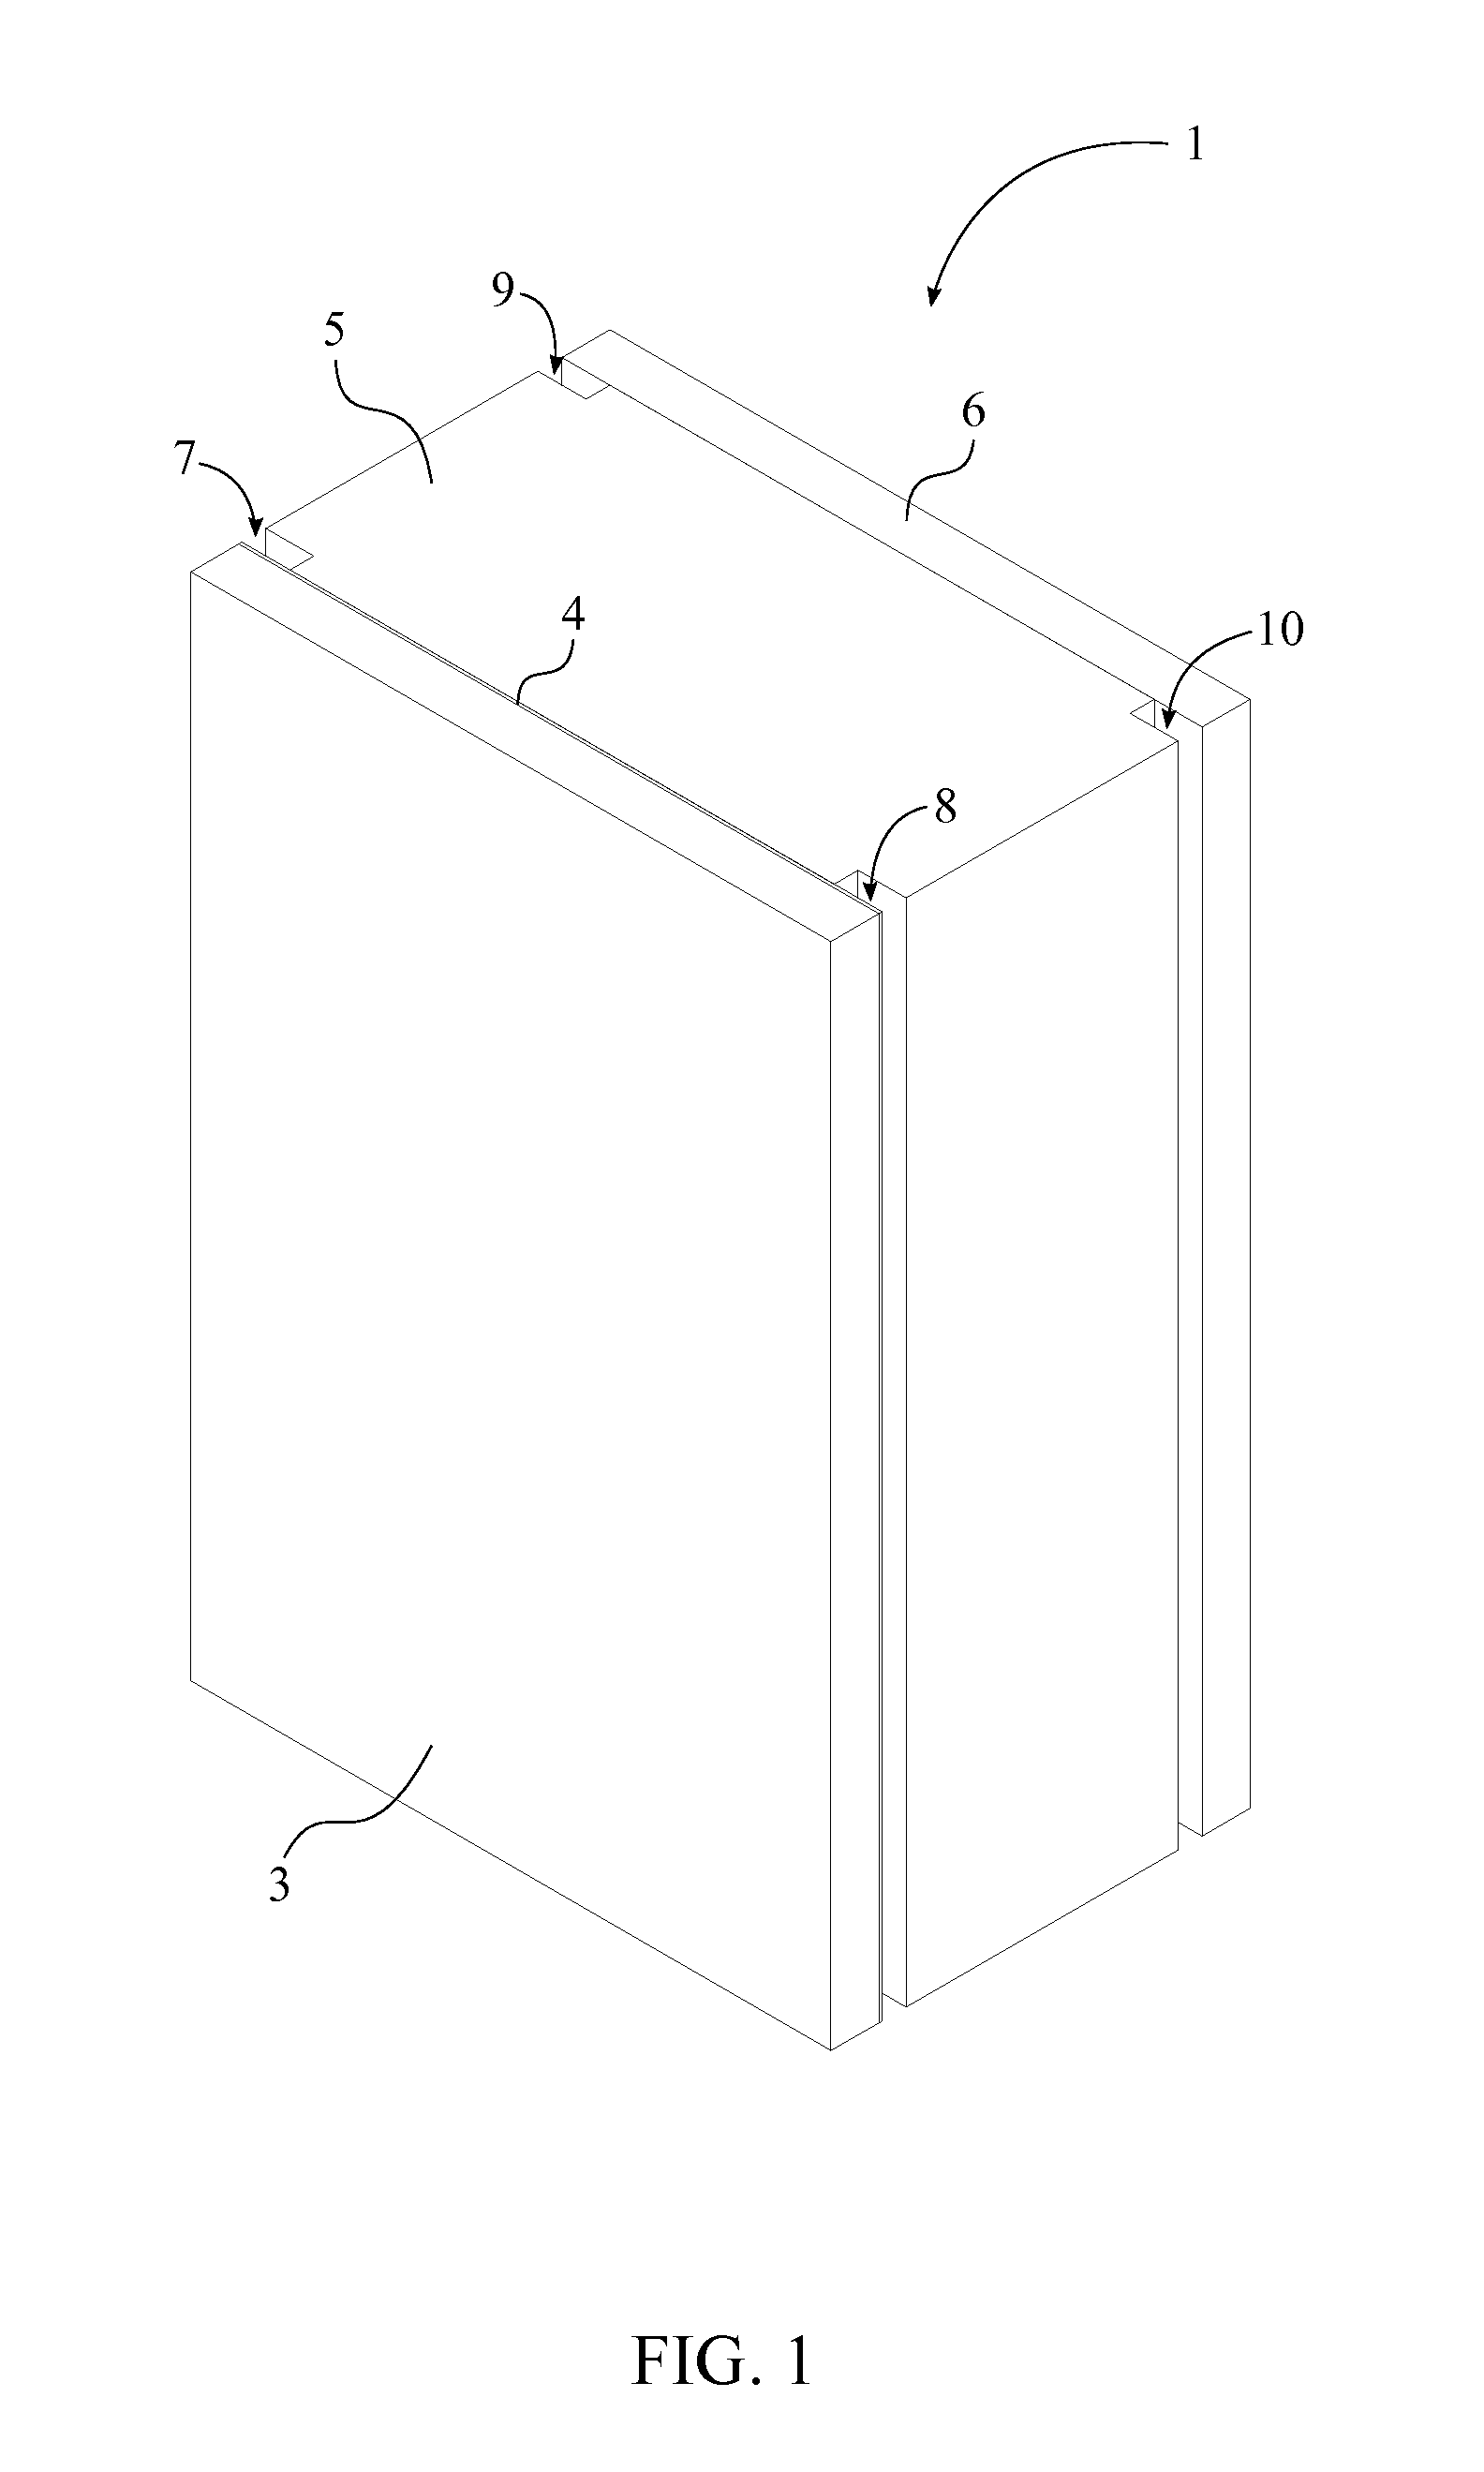 Method of connecting structural insulated building panels through connecting splines